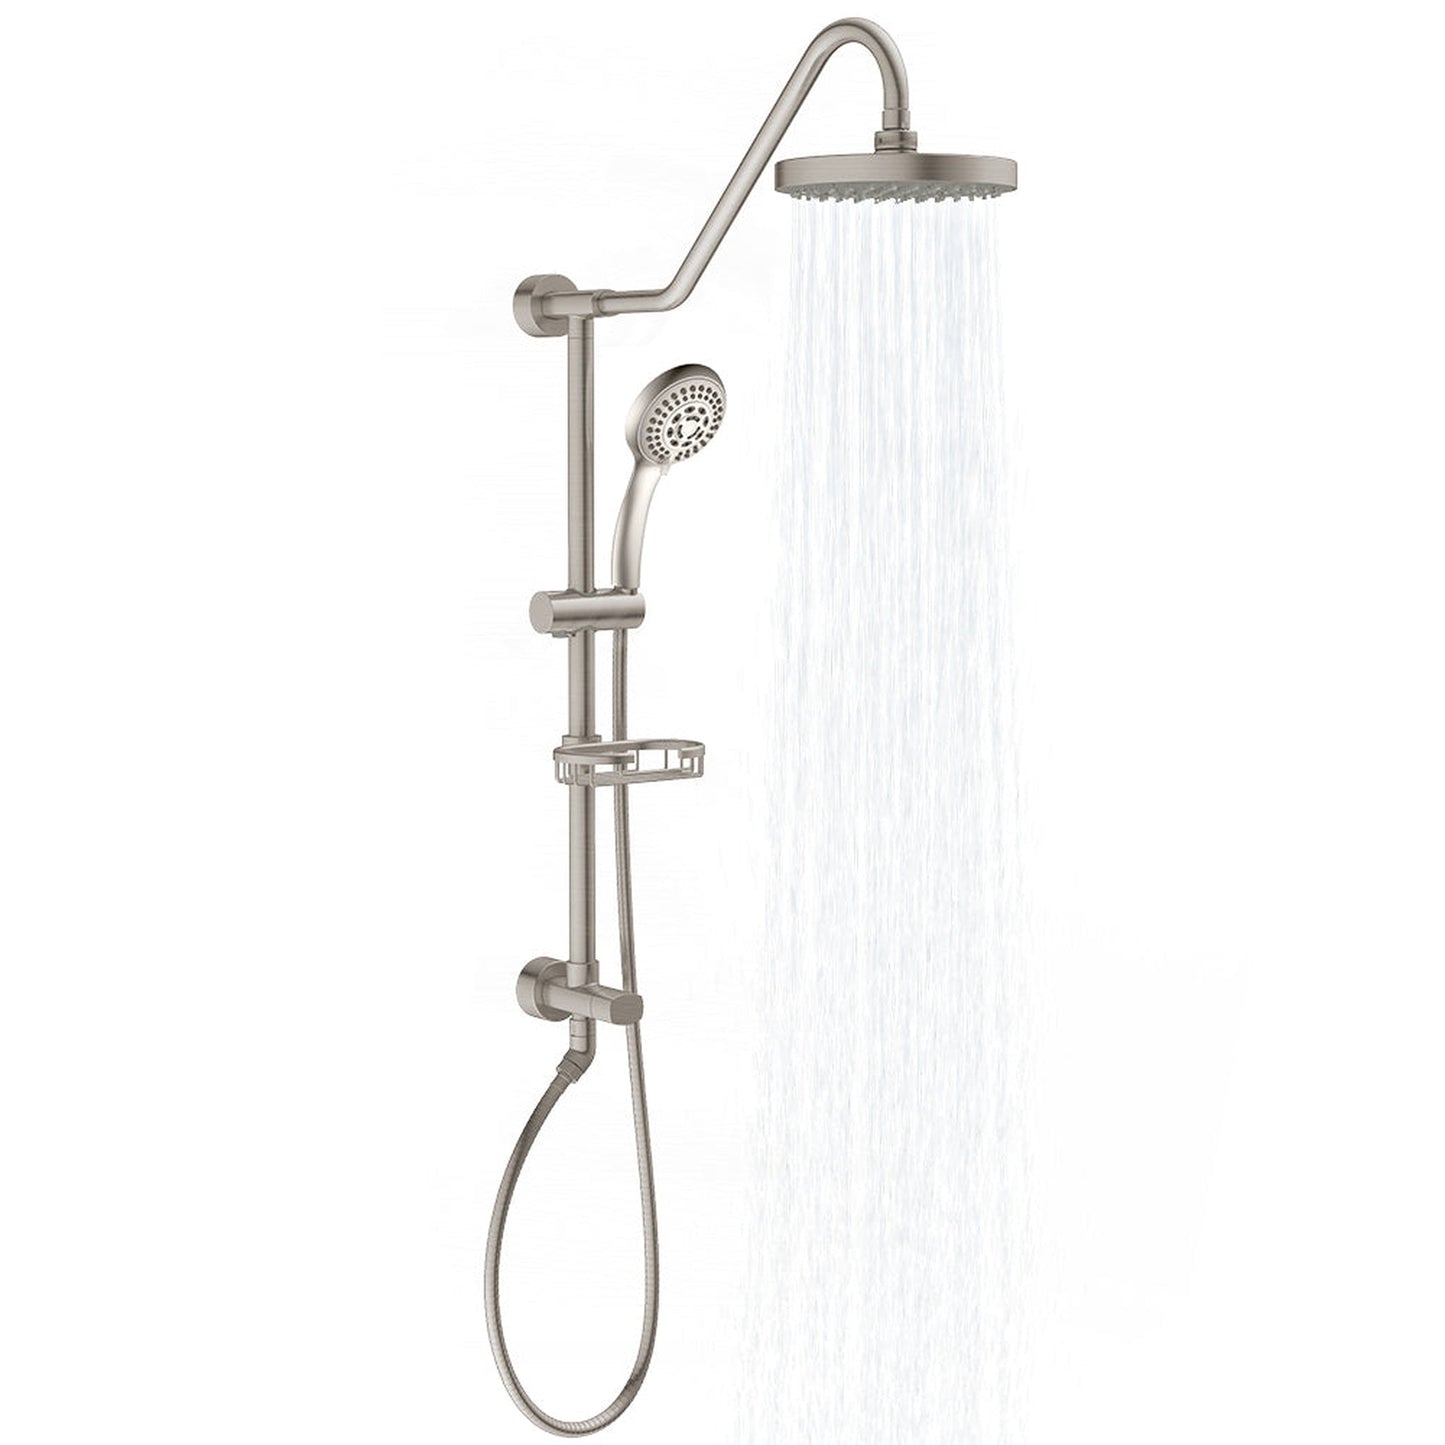 PULSE ShowerSpas Kauai III 2.5 GPM Rain Shower System in Brushed Nickel Finish With 5-Function Hand Shower